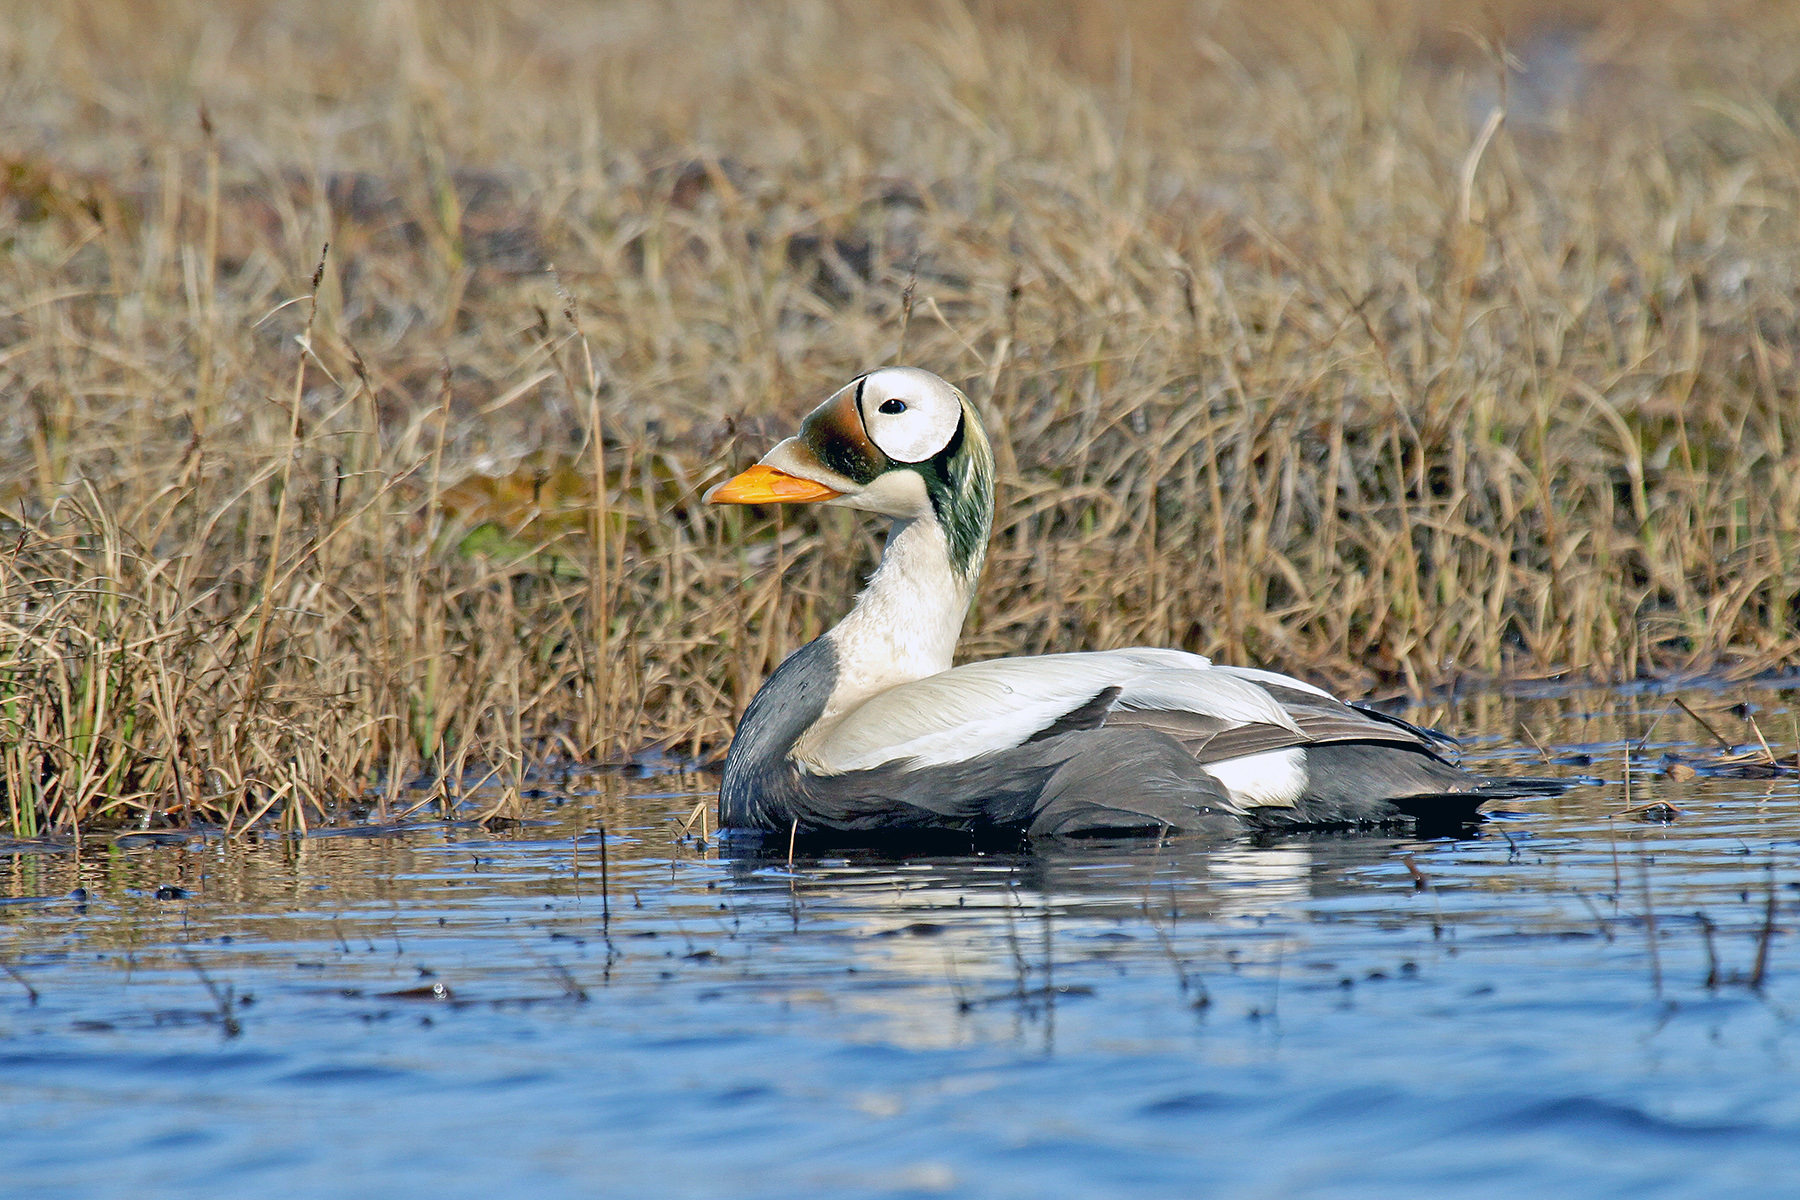 Spectacled Eider on our Alaska birding tour (image by Pete Morris)